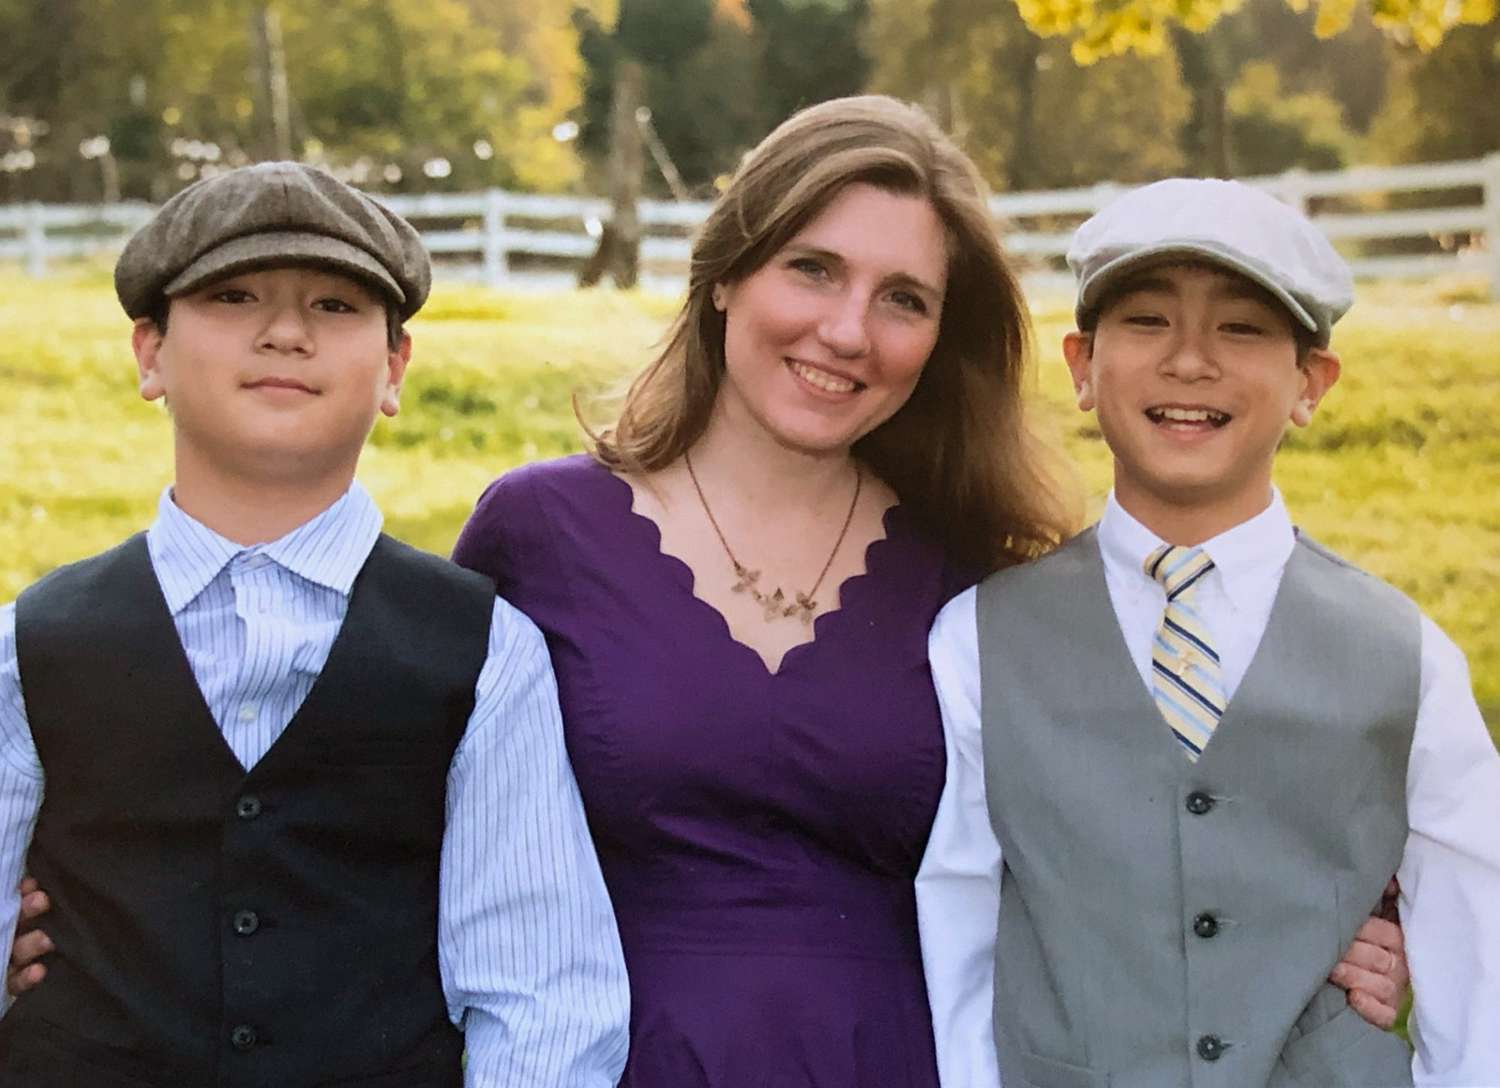 Ashlea Betzen-Miyauchi with her boys, Kay and Sho, at her sister Hillary's wedding in 2016.